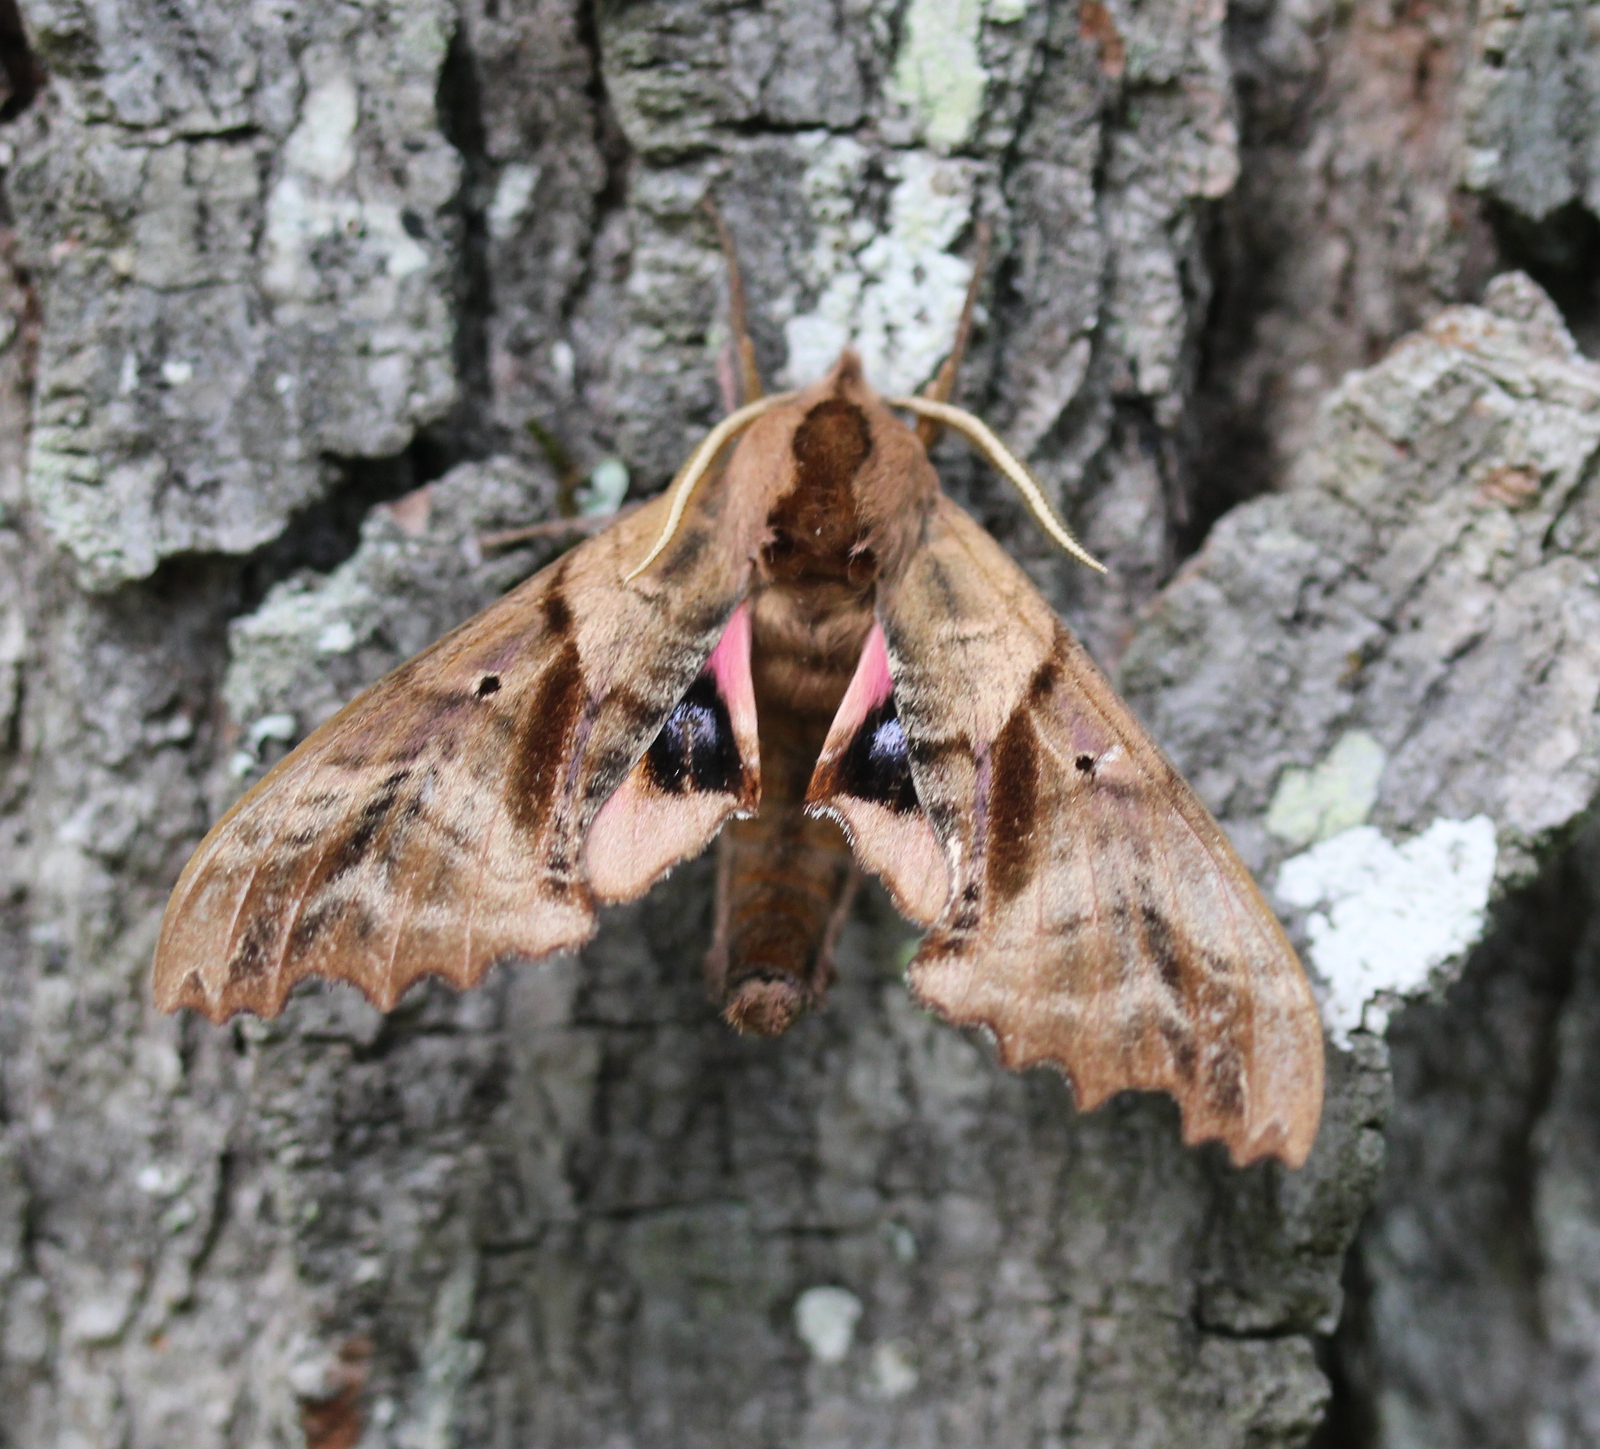 large brown moth on bark, hind wings exposed with eye spots